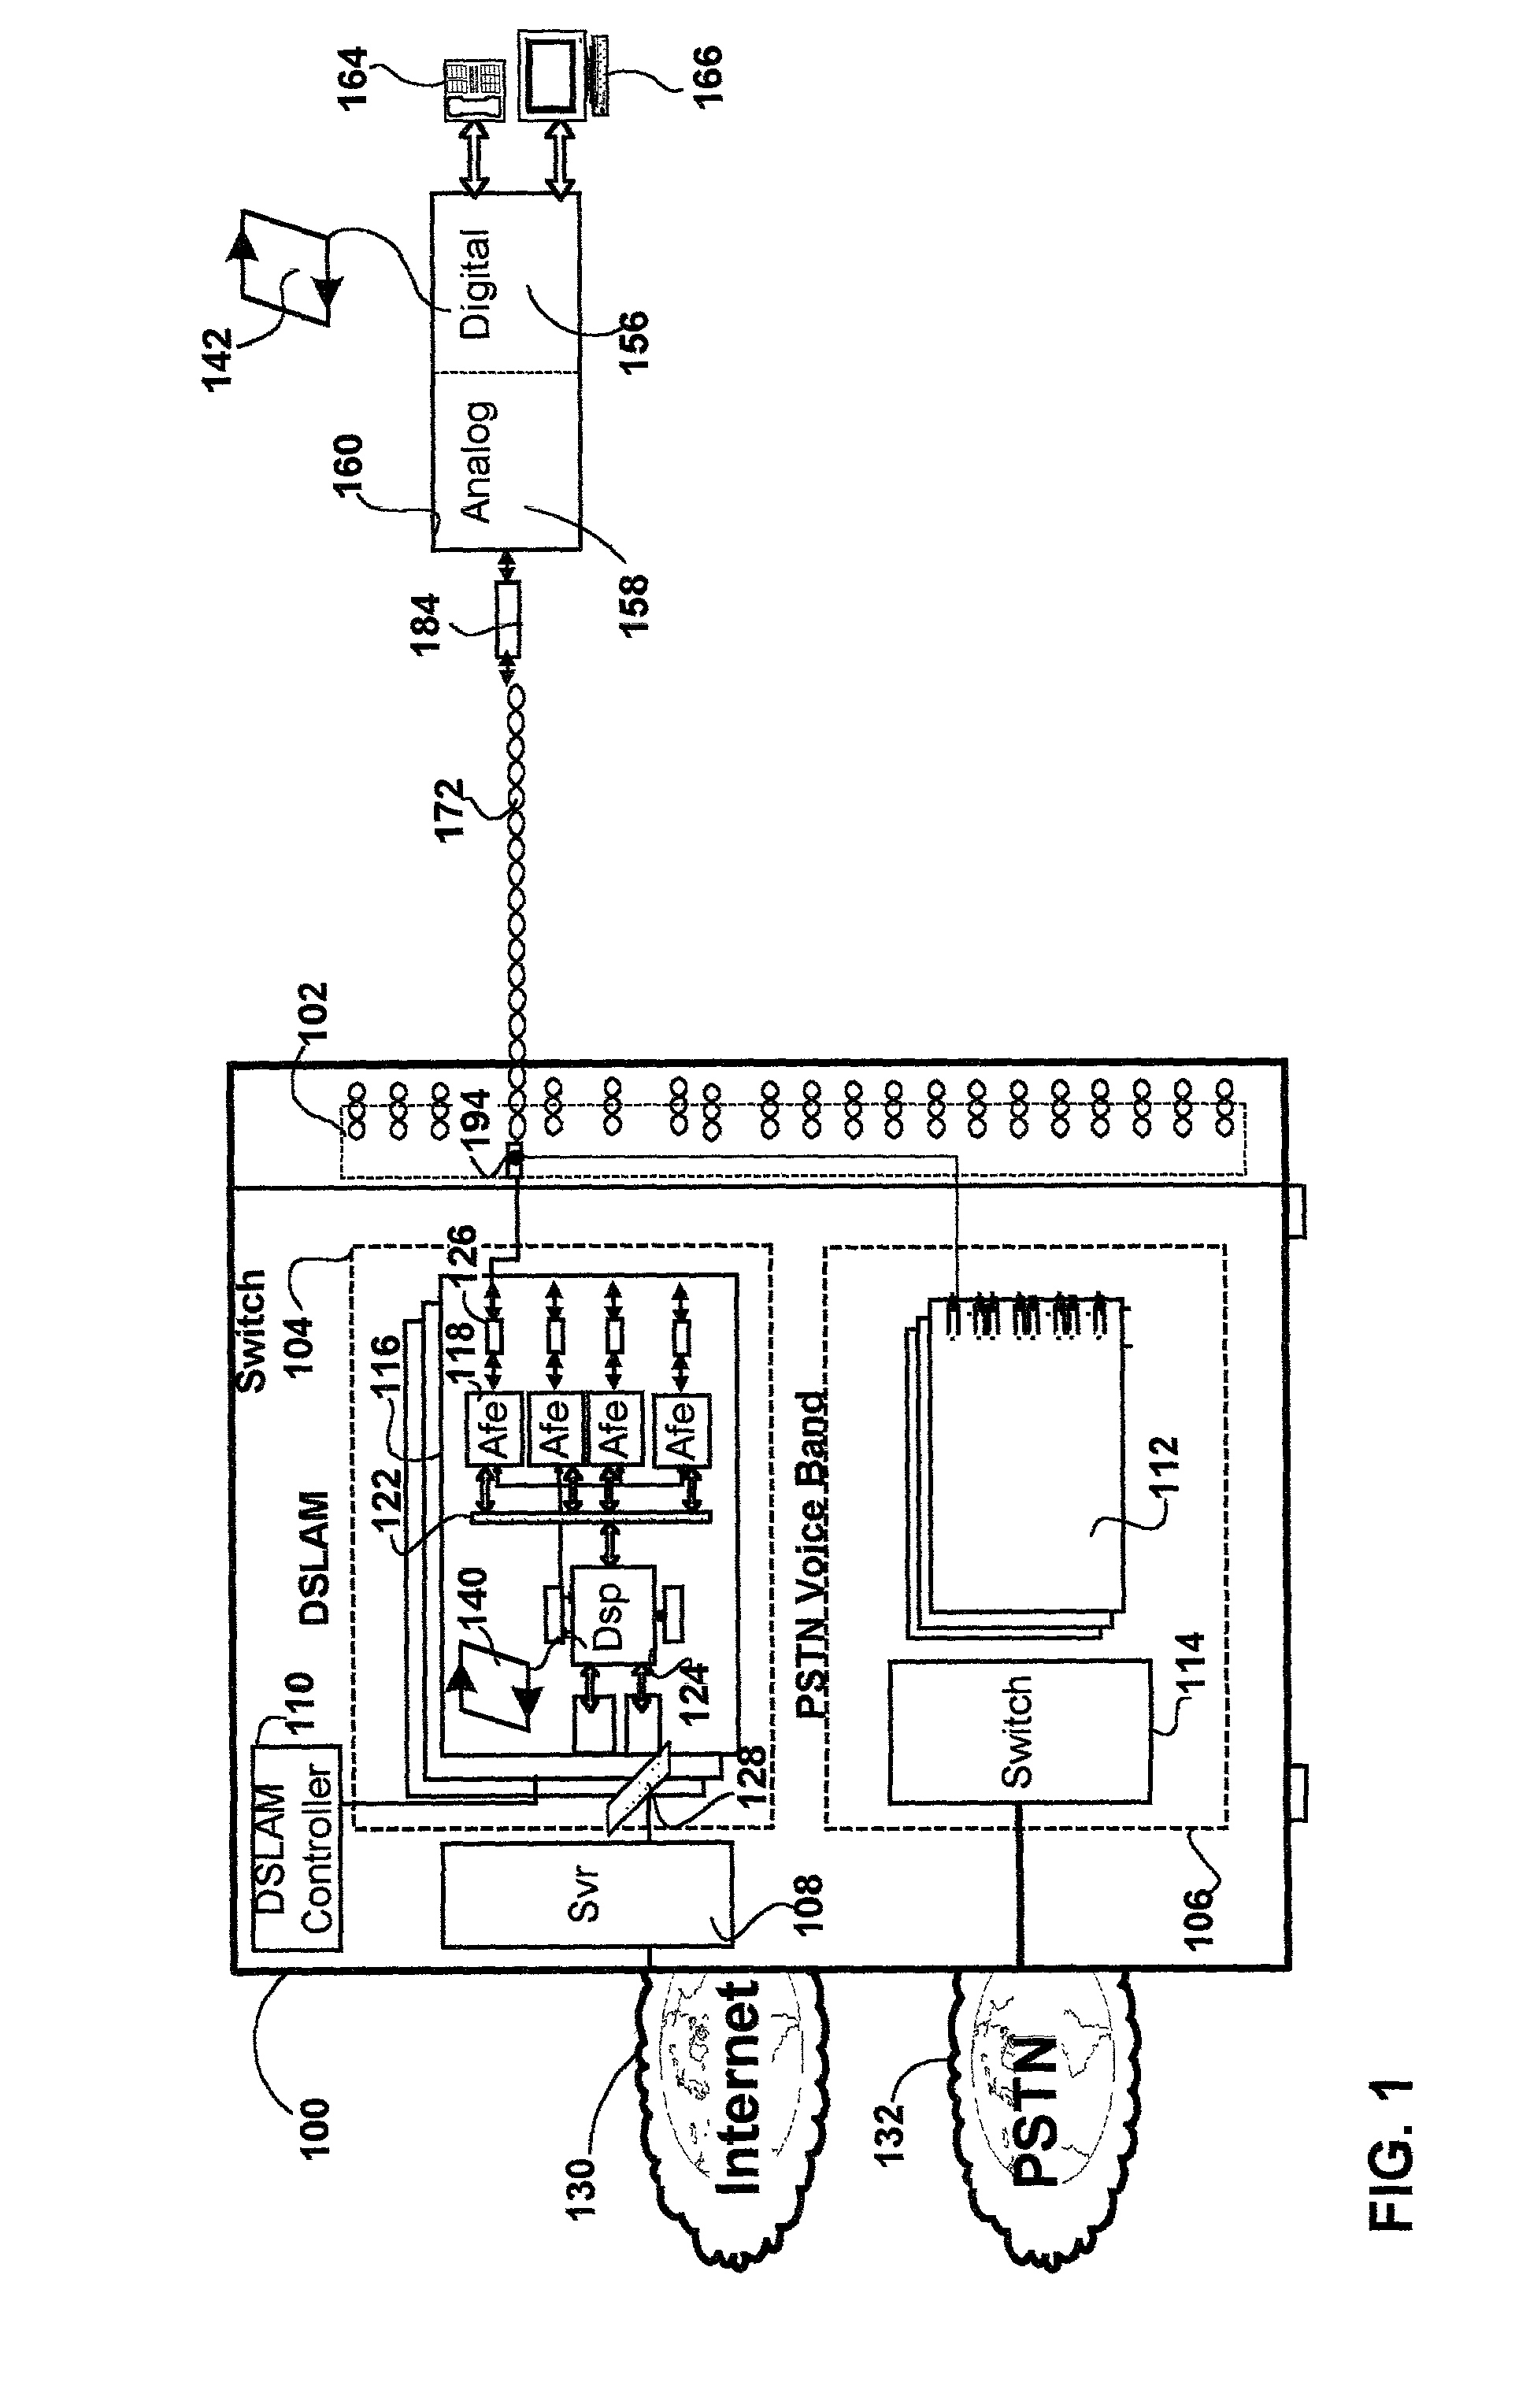 Method and apparatus for time-frequency domain forward error correction for digital communication systems